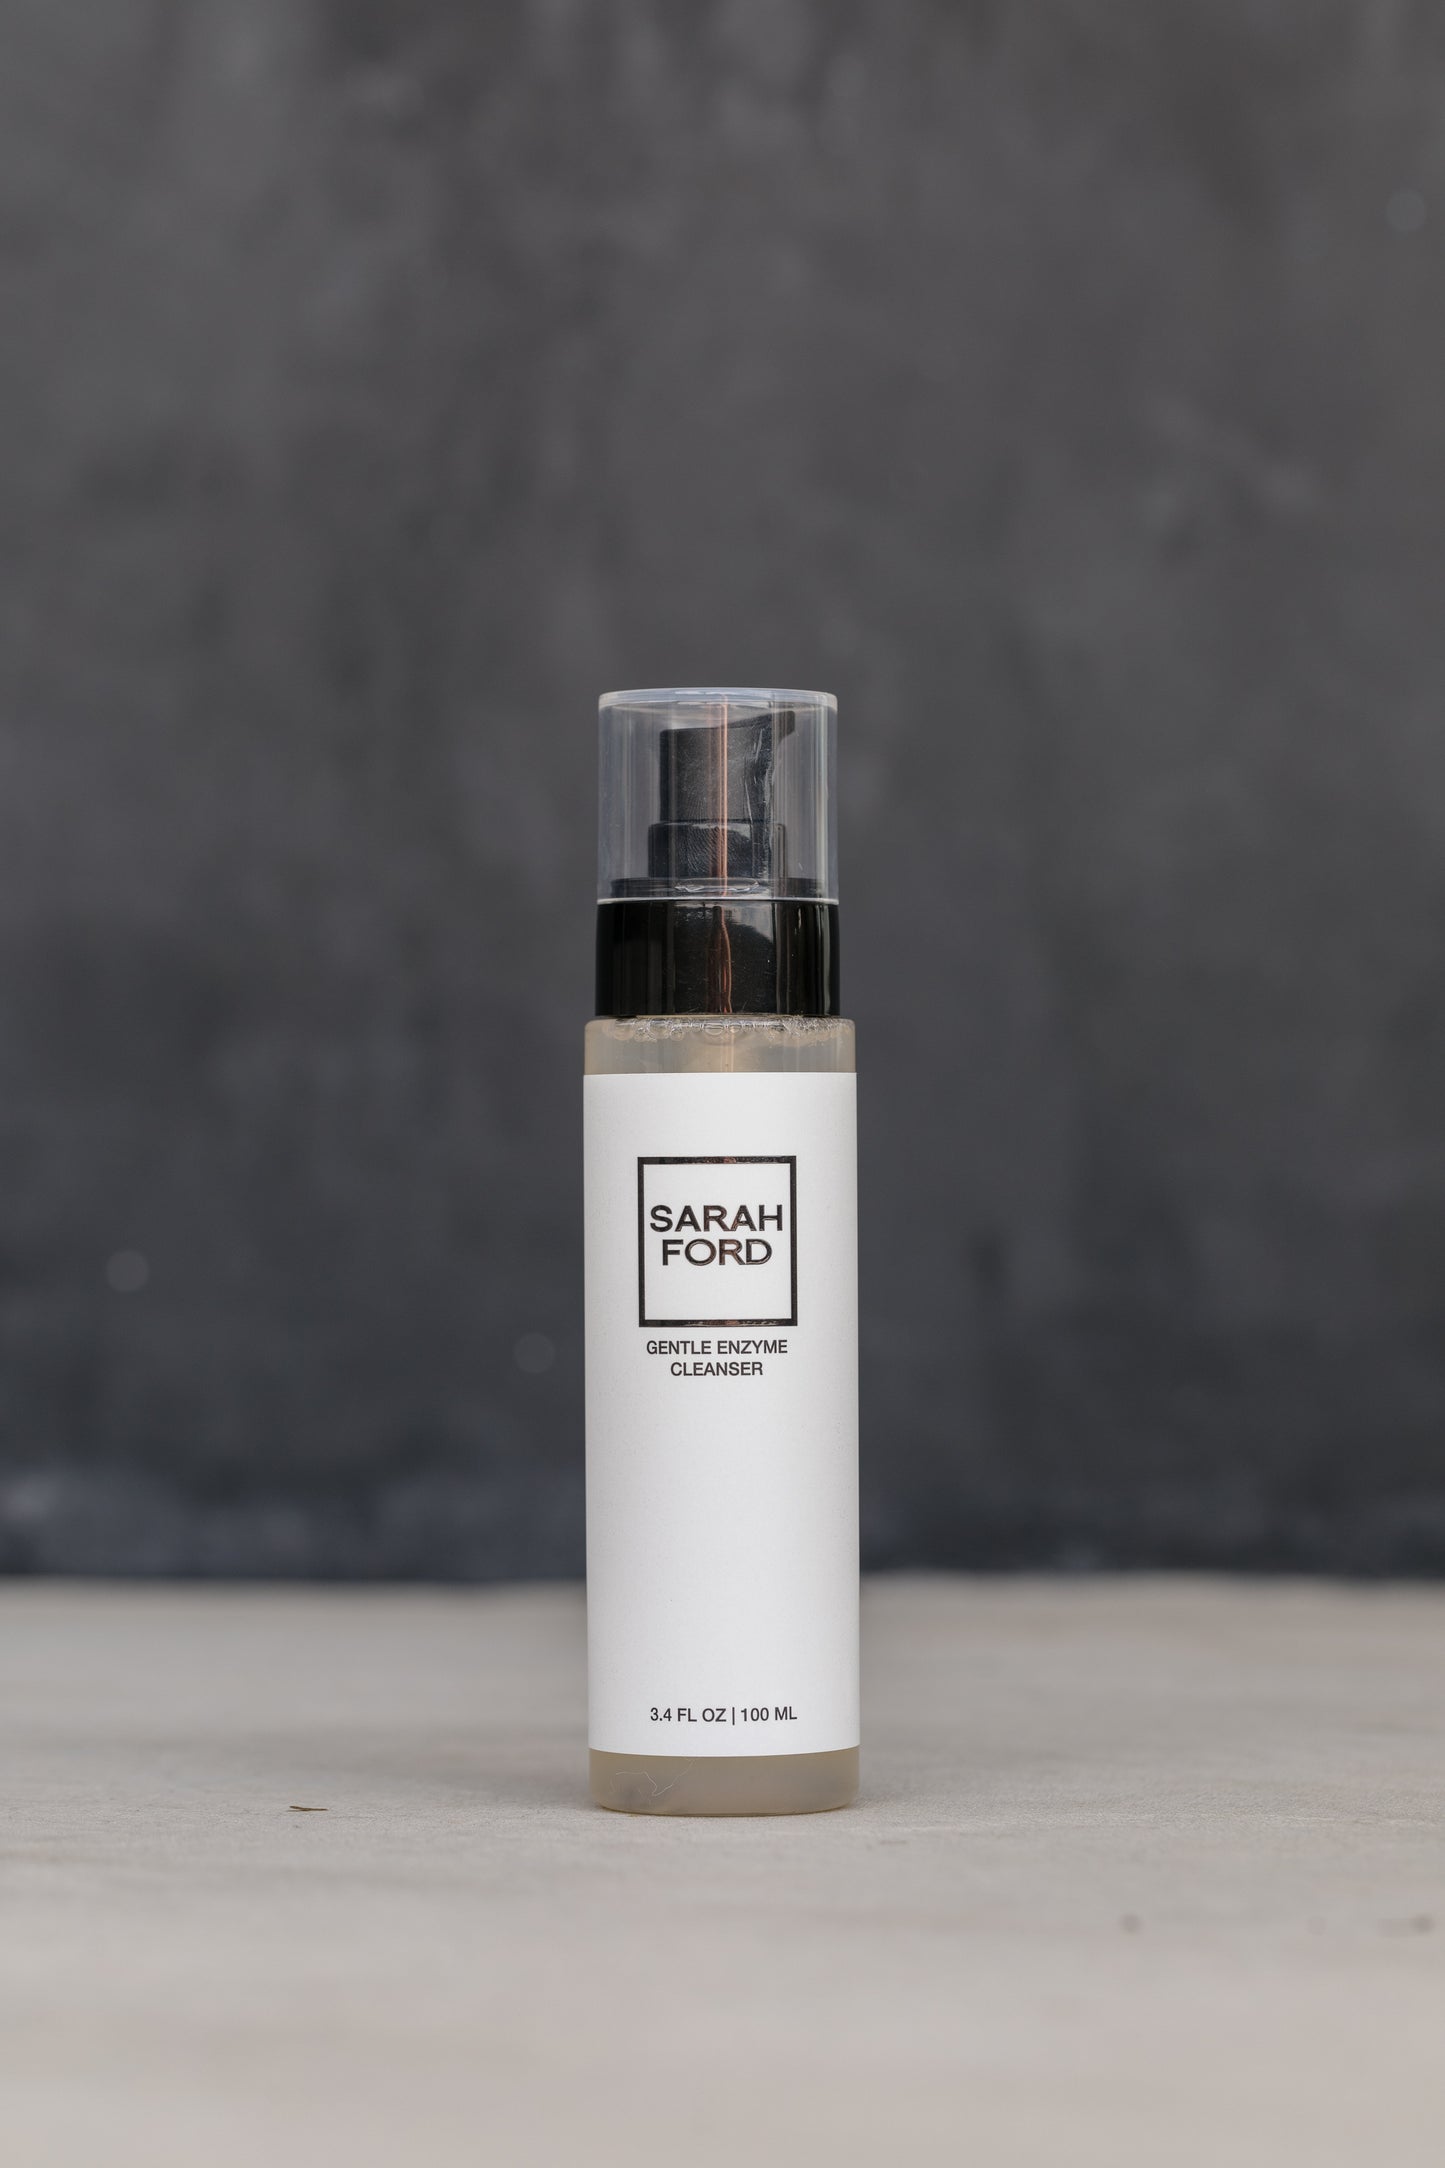 SARAH FORD GENTLE ENZYME CLEANSER